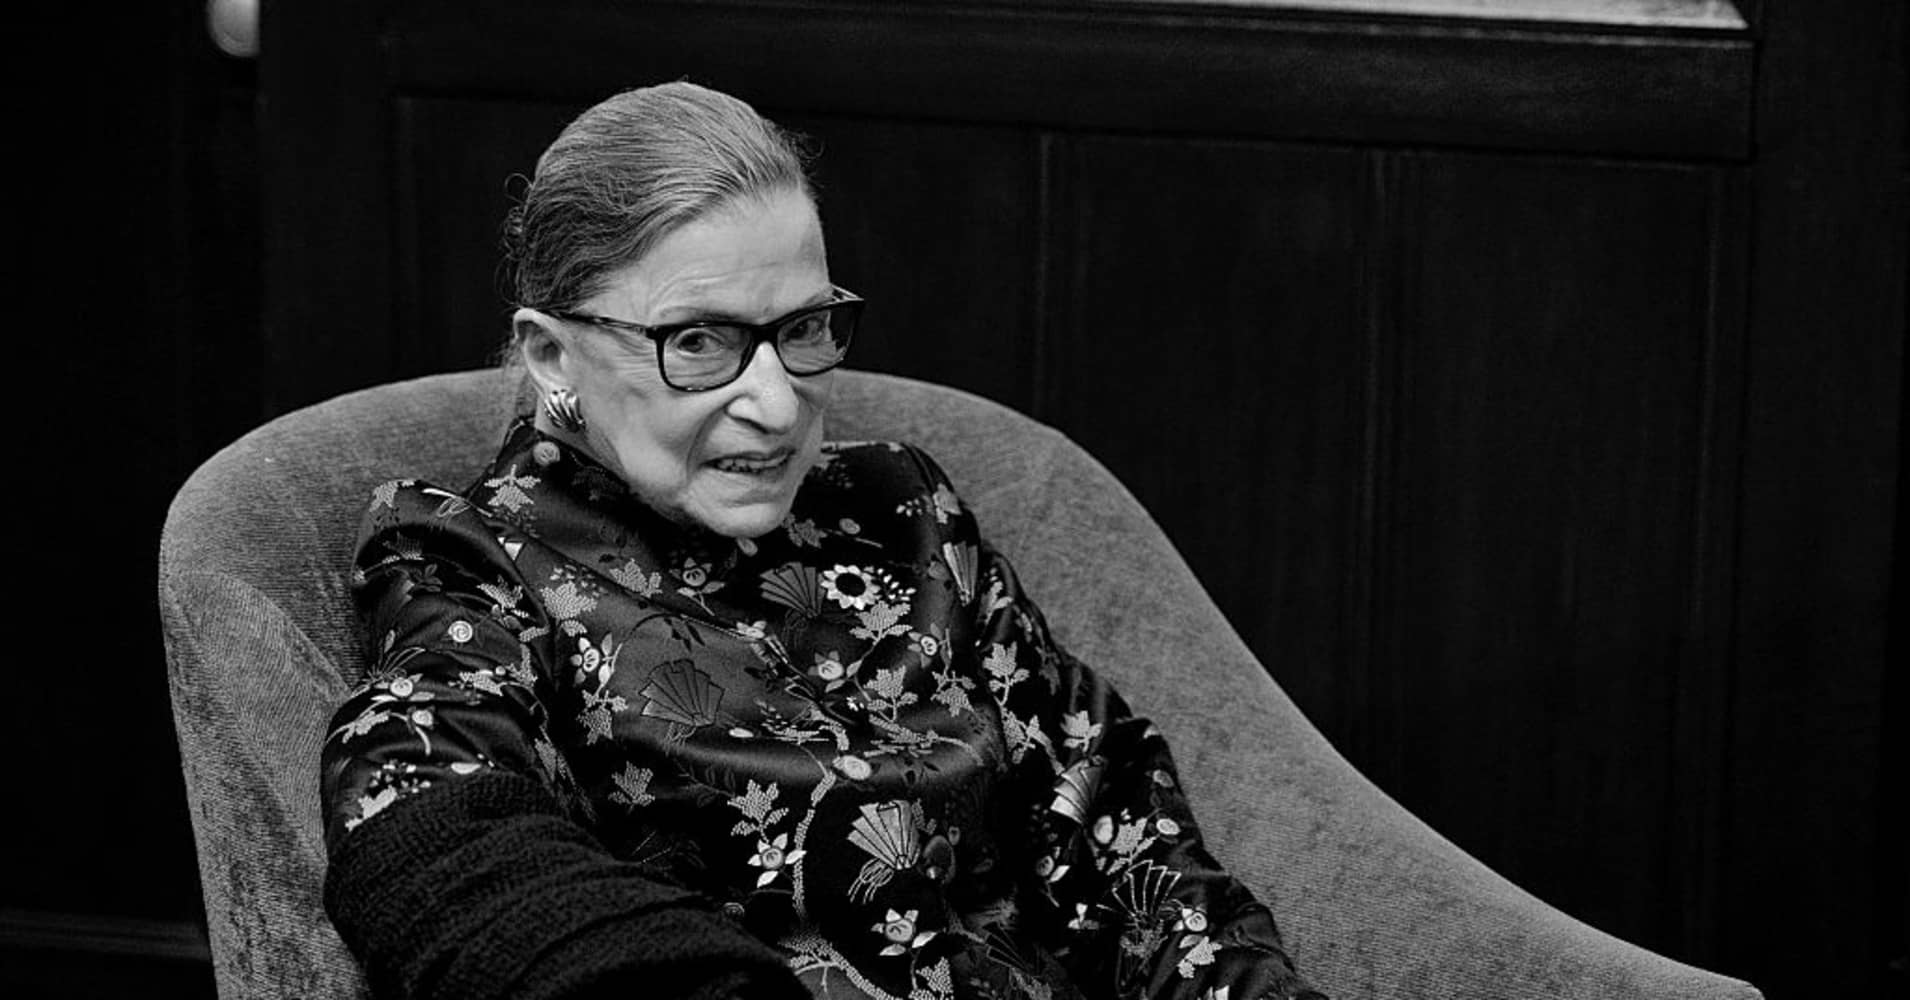 role-models-so-scarce-for-ruth-bader-ginsburg-she-had-to-make-one-up